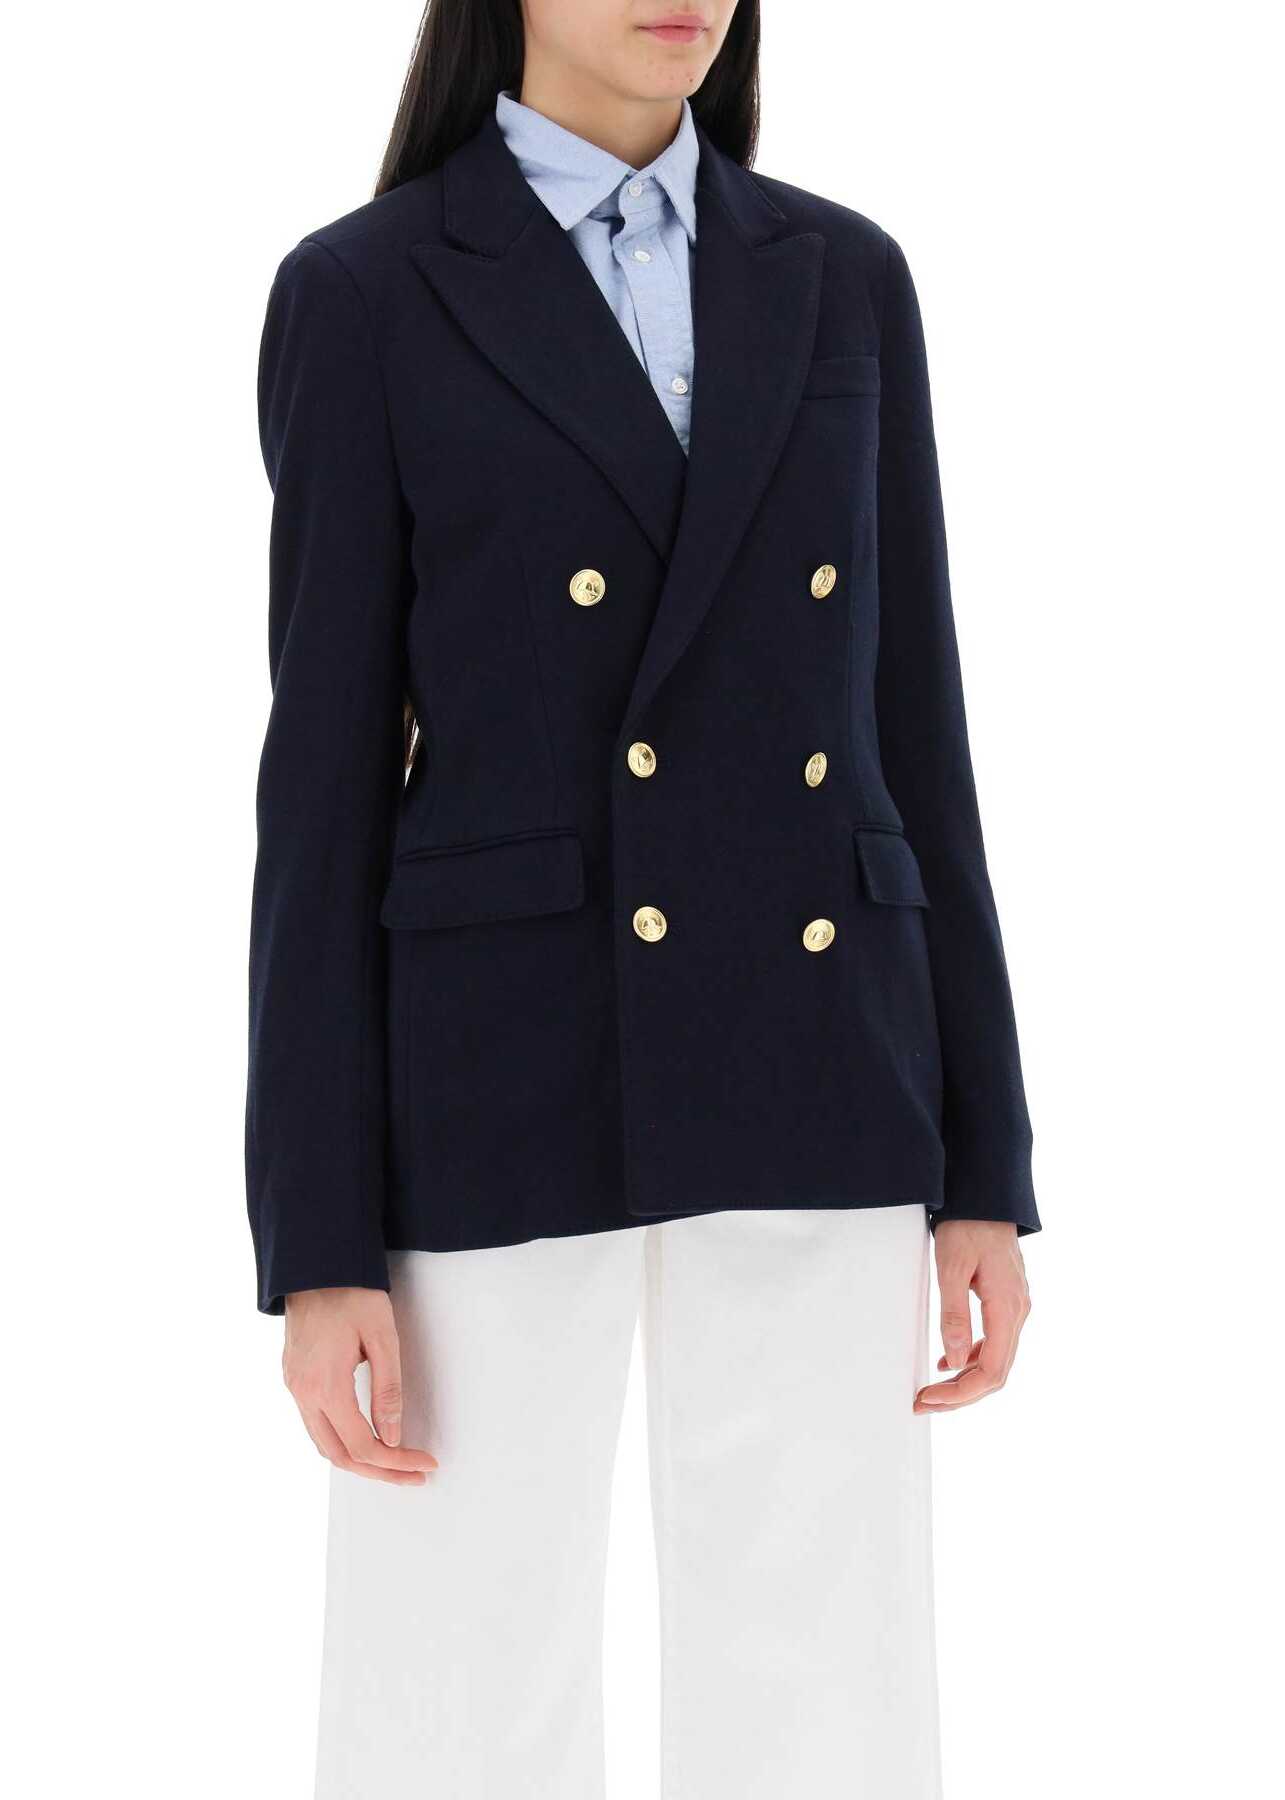 Ralph Lauren Knitted Double-Breasted Jacket PARK AVENUE NAVY